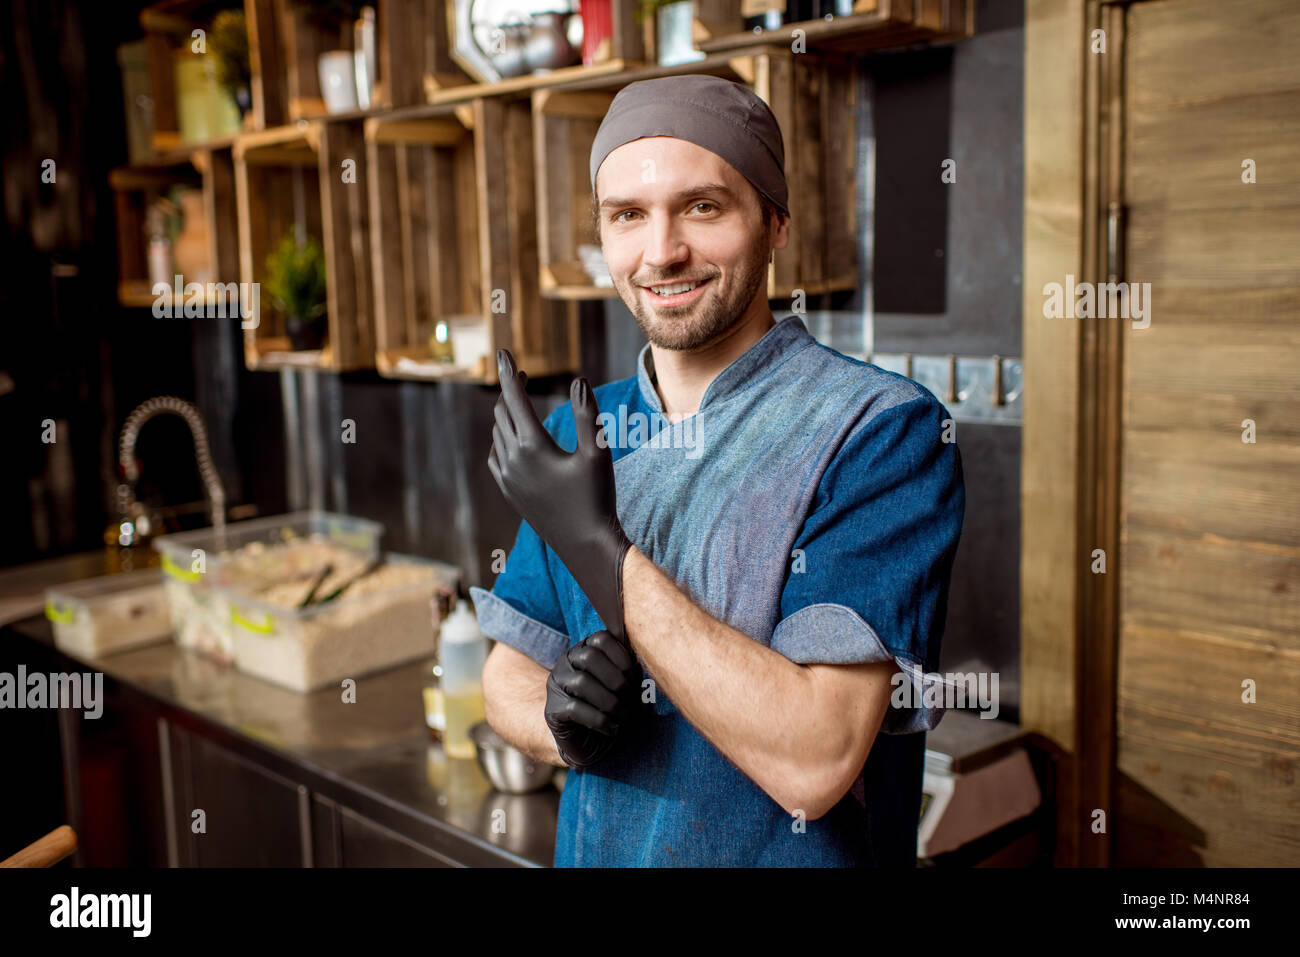 Chief cook at the asian restaurant kitchen Stock Photo